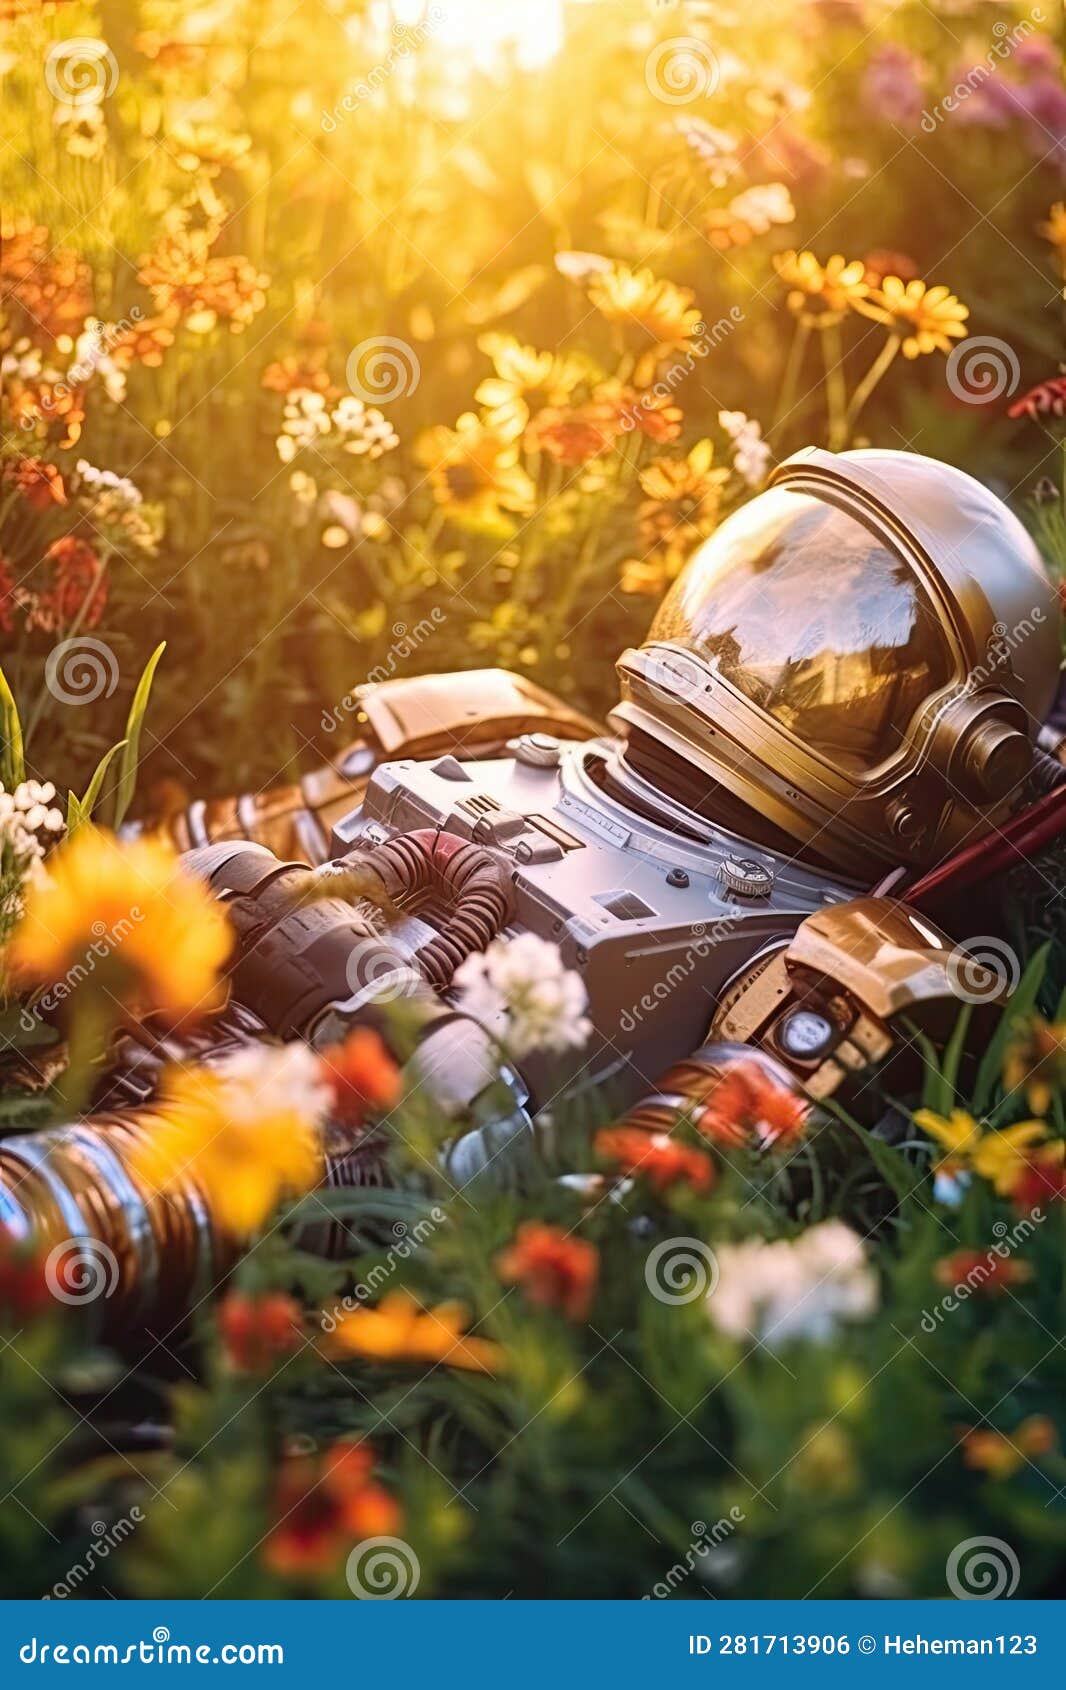 astronaut lying in a flower field looking up at the sky